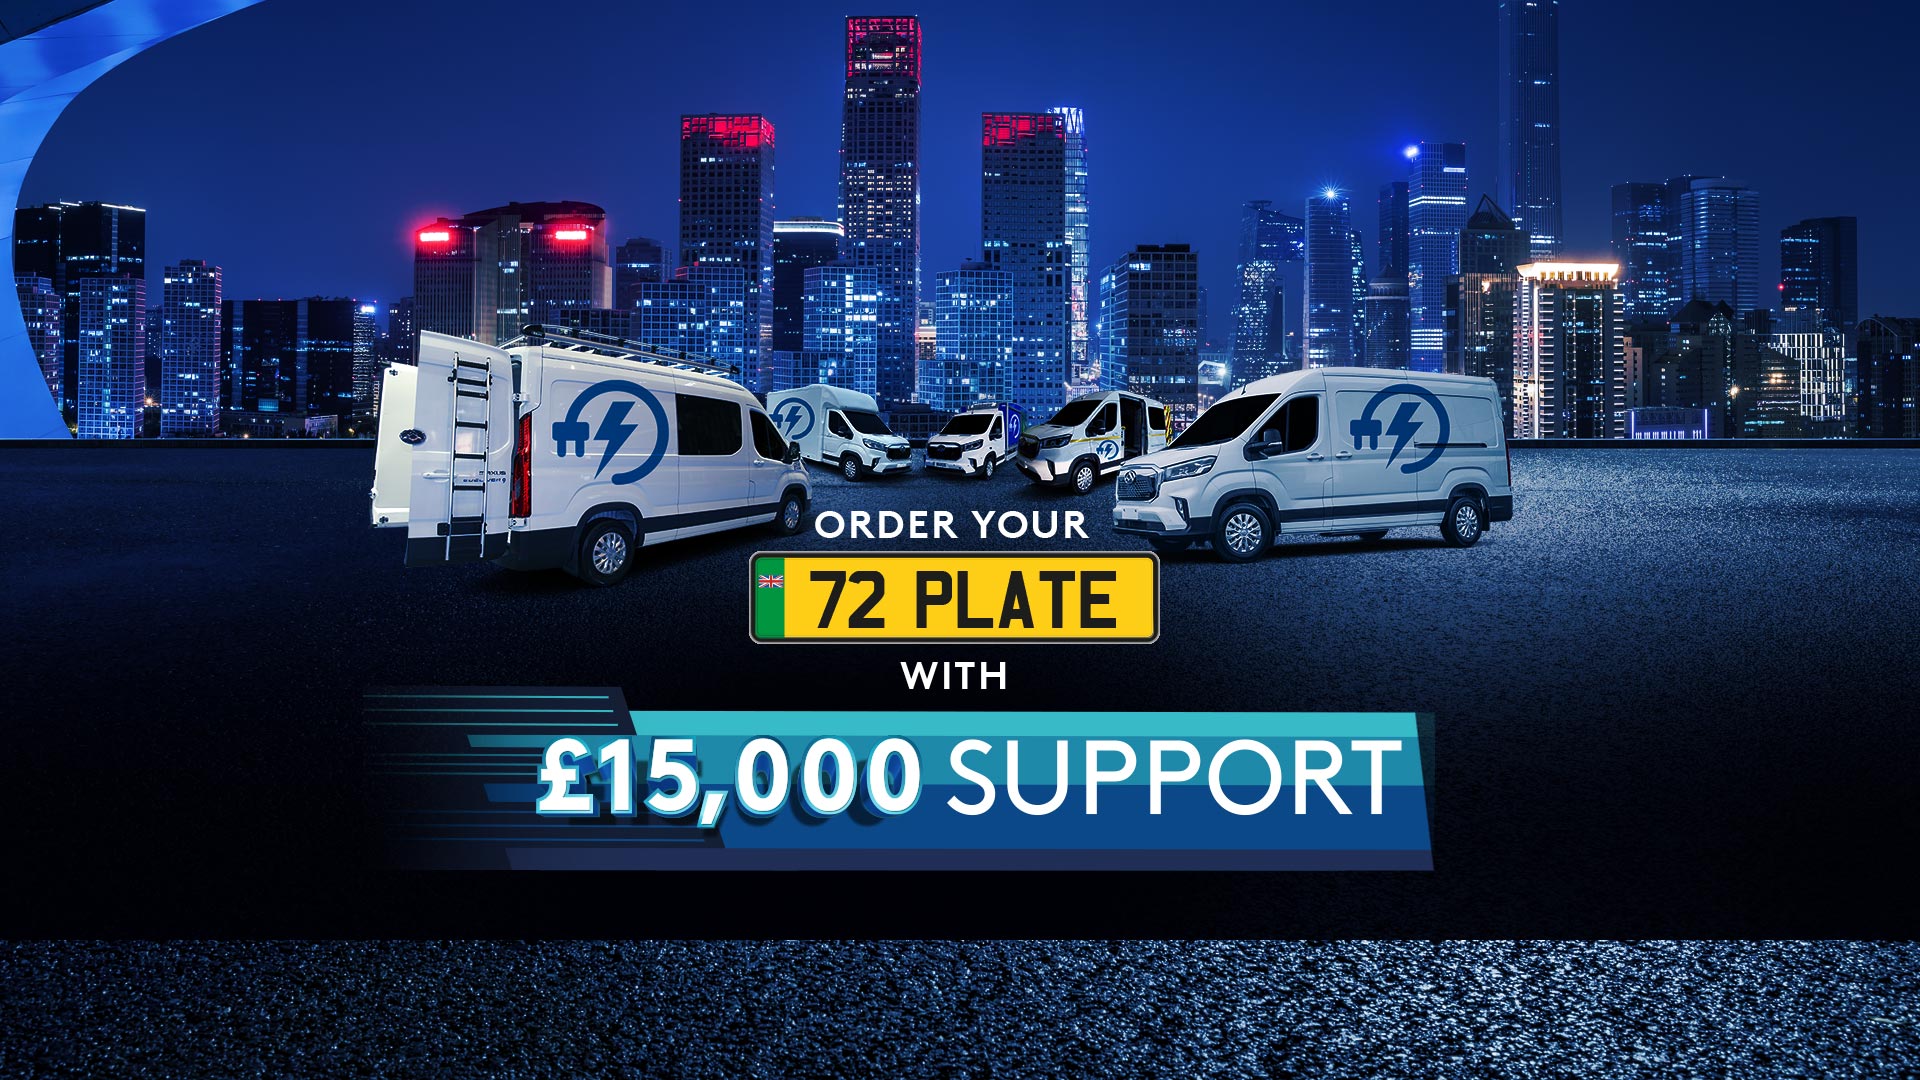 Order your 72 plate now - Limited stock available